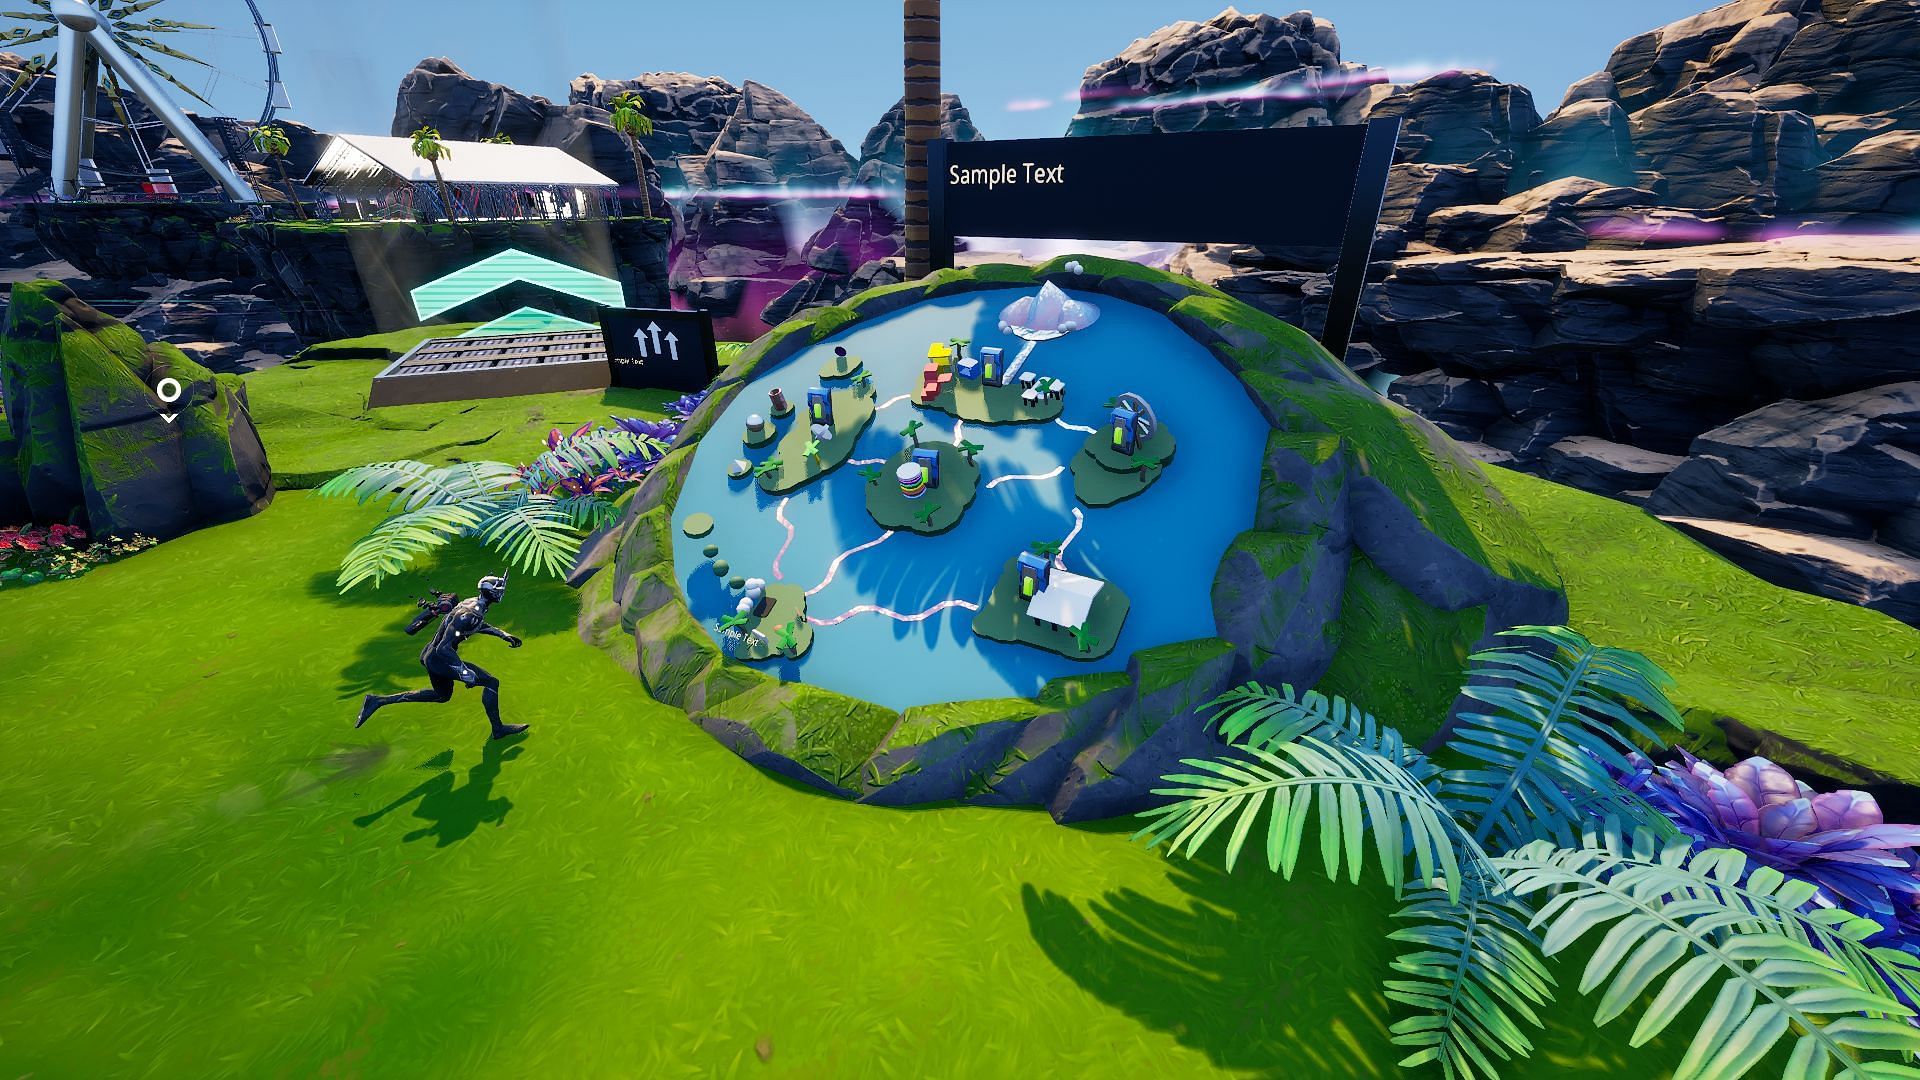 Interact with the replica of the Coachella Island to start the Challenge (Image via Epic Games/Fortnite)